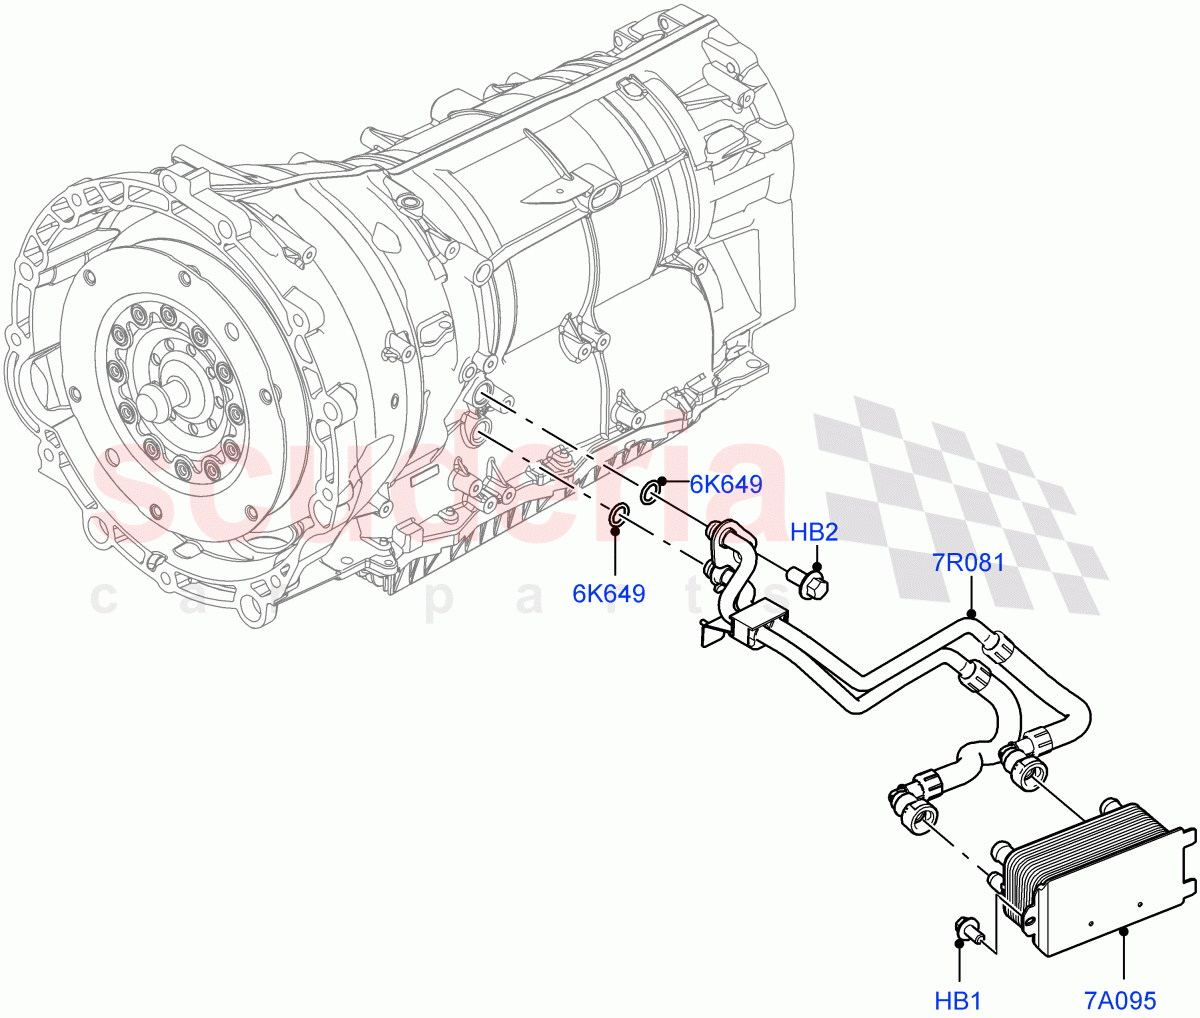 Transmission Cooling Systems(Nitra Plant Build)(3.0L AJ20P6 Petrol High,8 Speed Auto Trans ZF 8HP76,3.0L AJ20D6 Diesel High) of Land Rover Land Rover Defender (2020+) [2.0 Turbo Diesel]